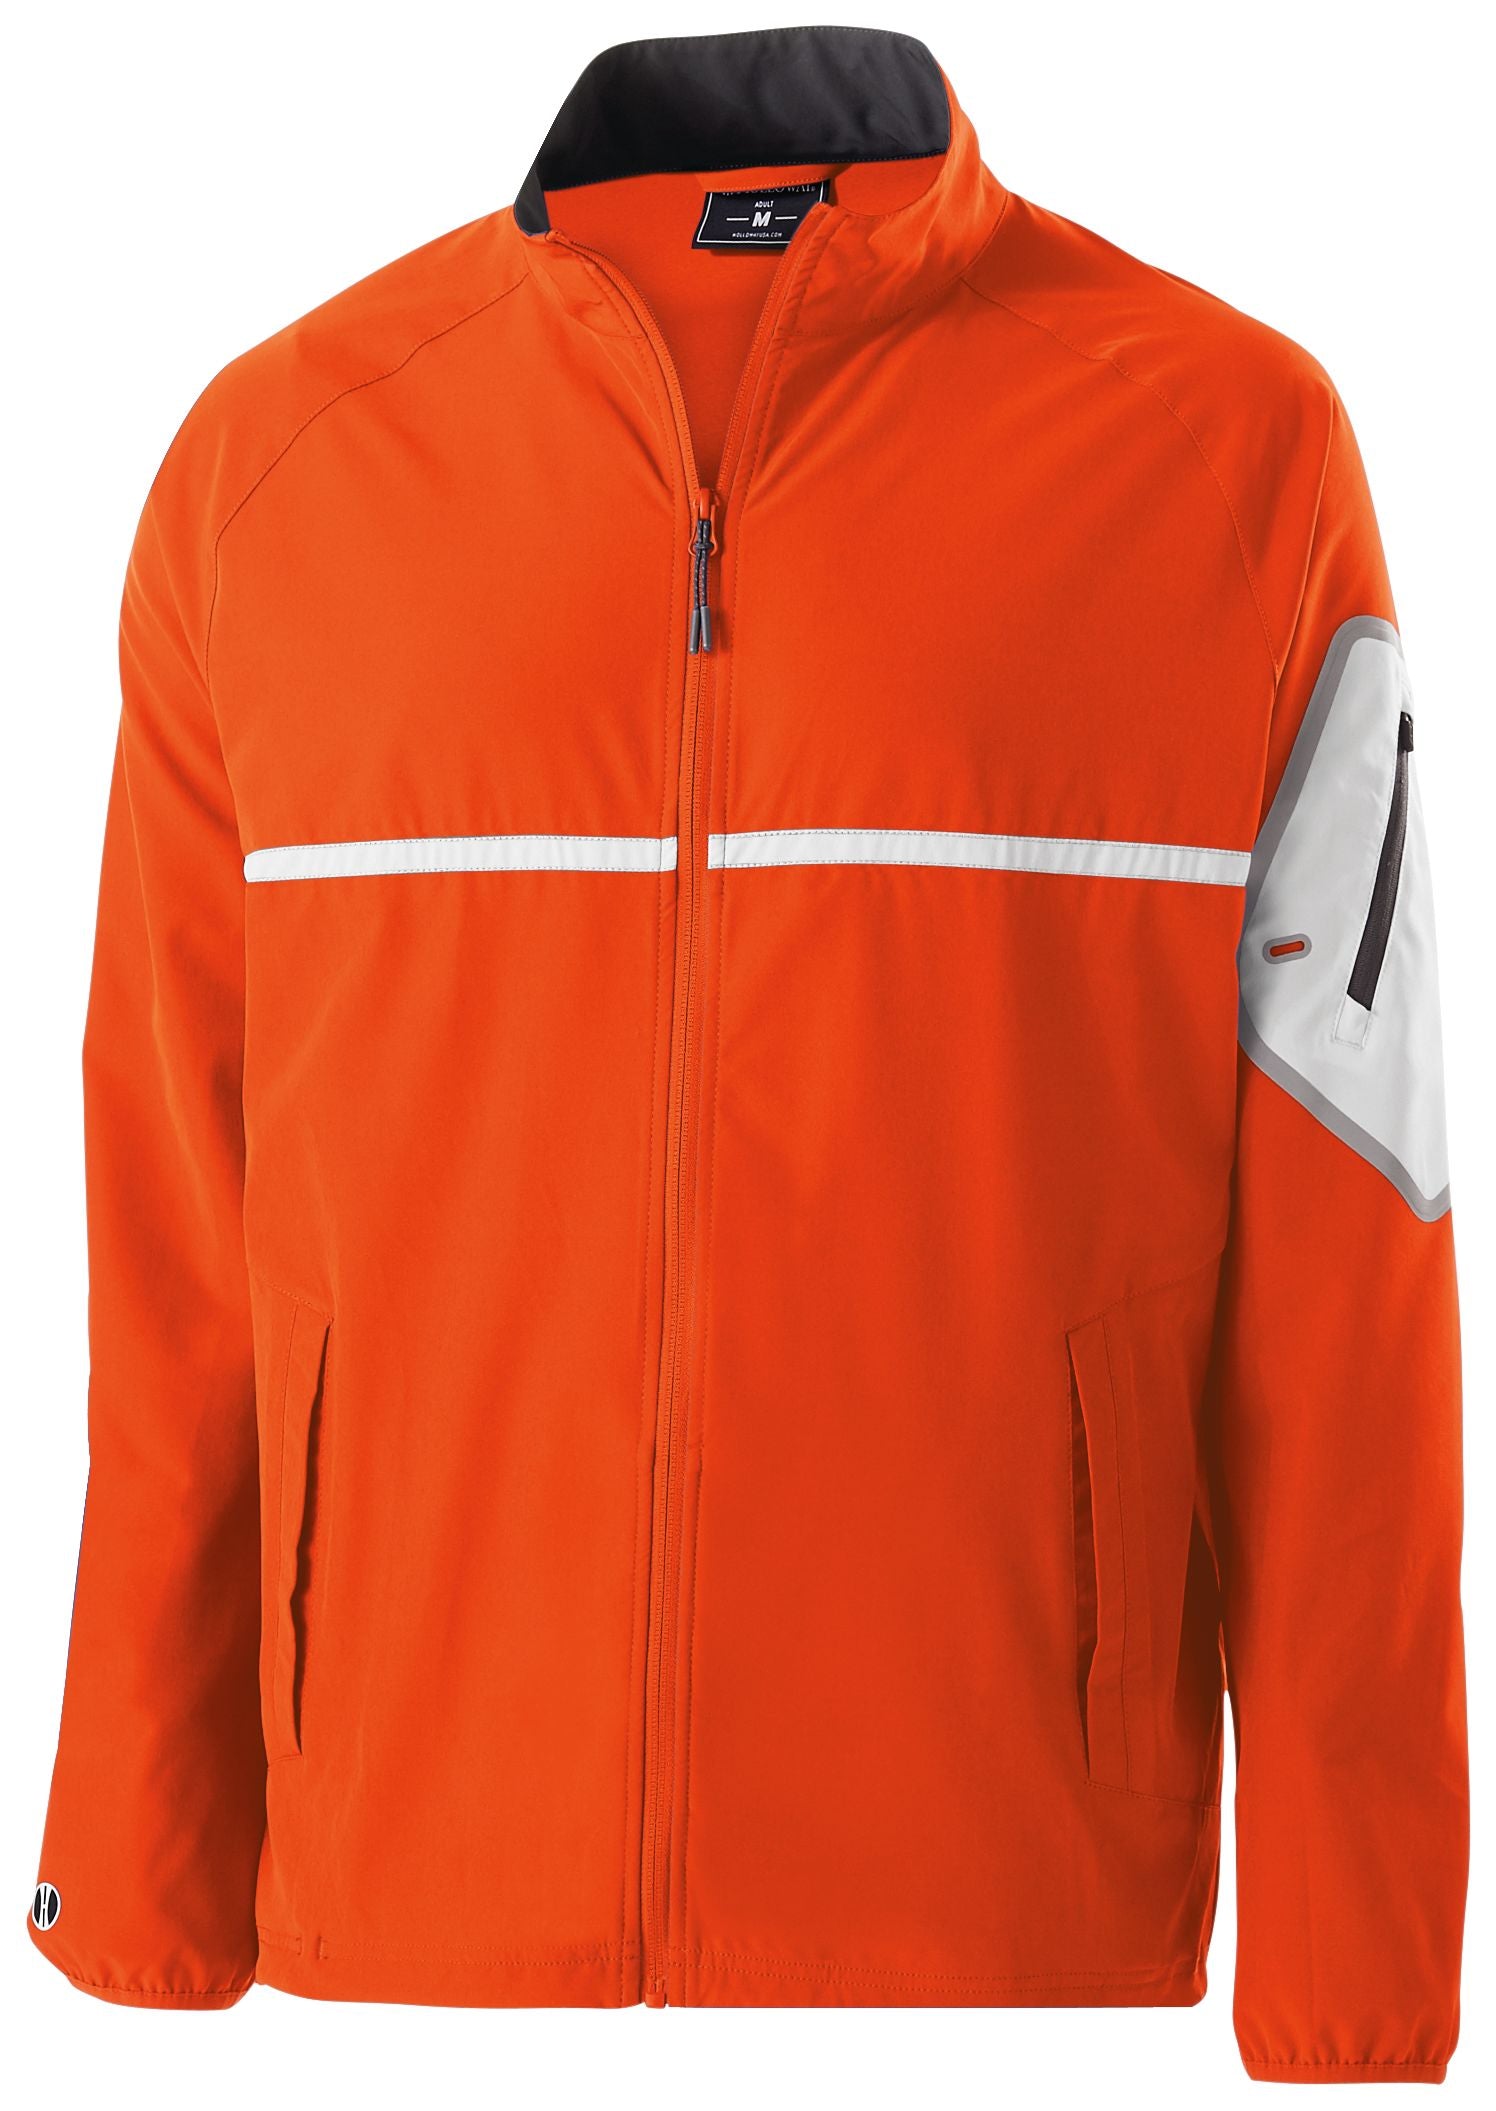 Holloway Weld Jacket in Orange/White  -Part of the Adult, Adult-Jacket, Holloway, Outerwear, Weld-Collection product lines at KanaleyCreations.com